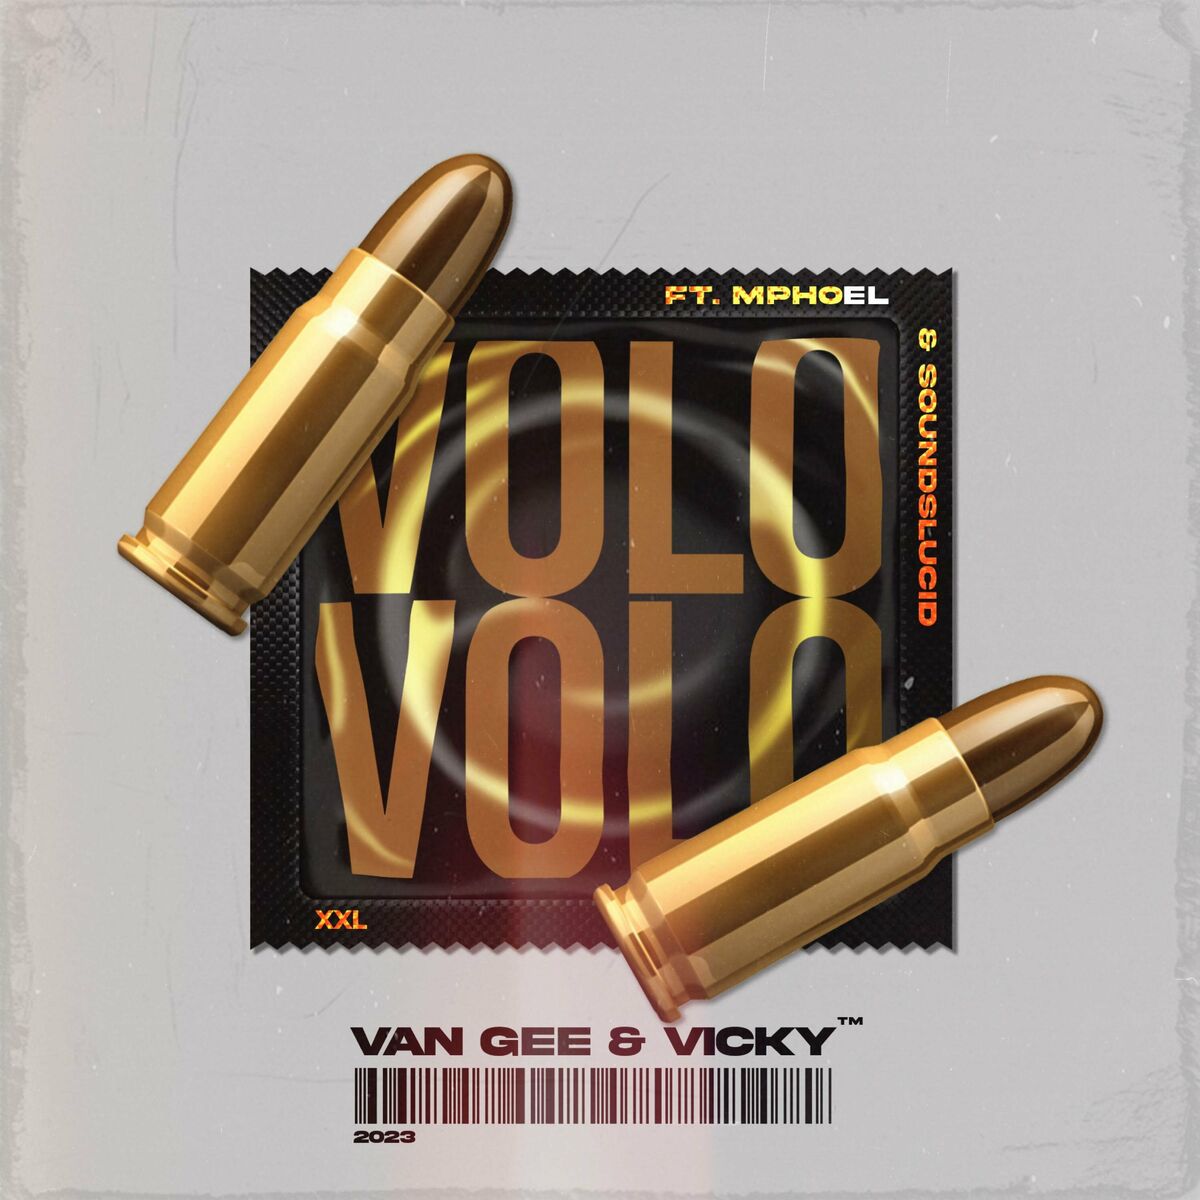 Van Gee & Vicky – VOLOVOLO feat. MphoEL, Soundslucid